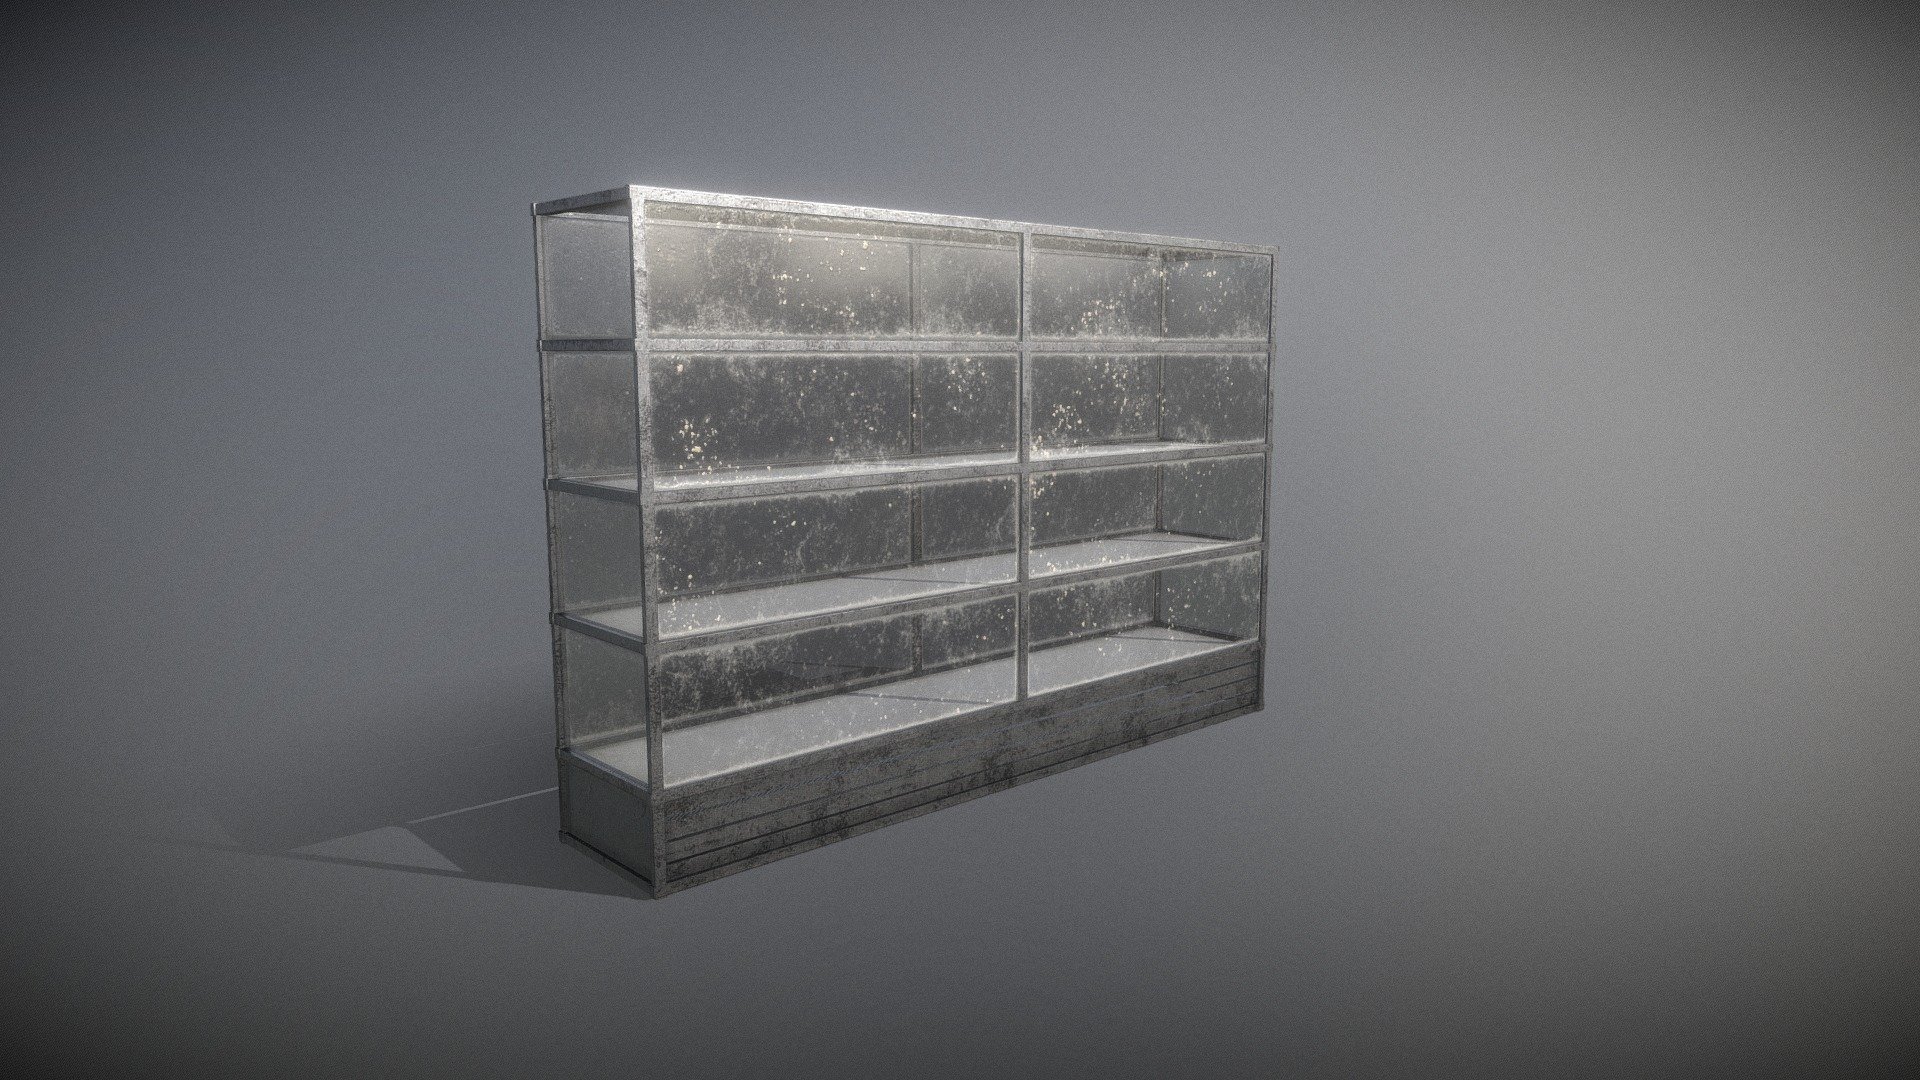 **Game Asset Etalase Shop Glass
A glass window is a display, a place to store various types of goods, especially merchandise that will be sold to consumers - Etalase Kaca Warung / Display Shop Case Glass - Buy Royalty Free 3D model by solodevelopment97 3d model